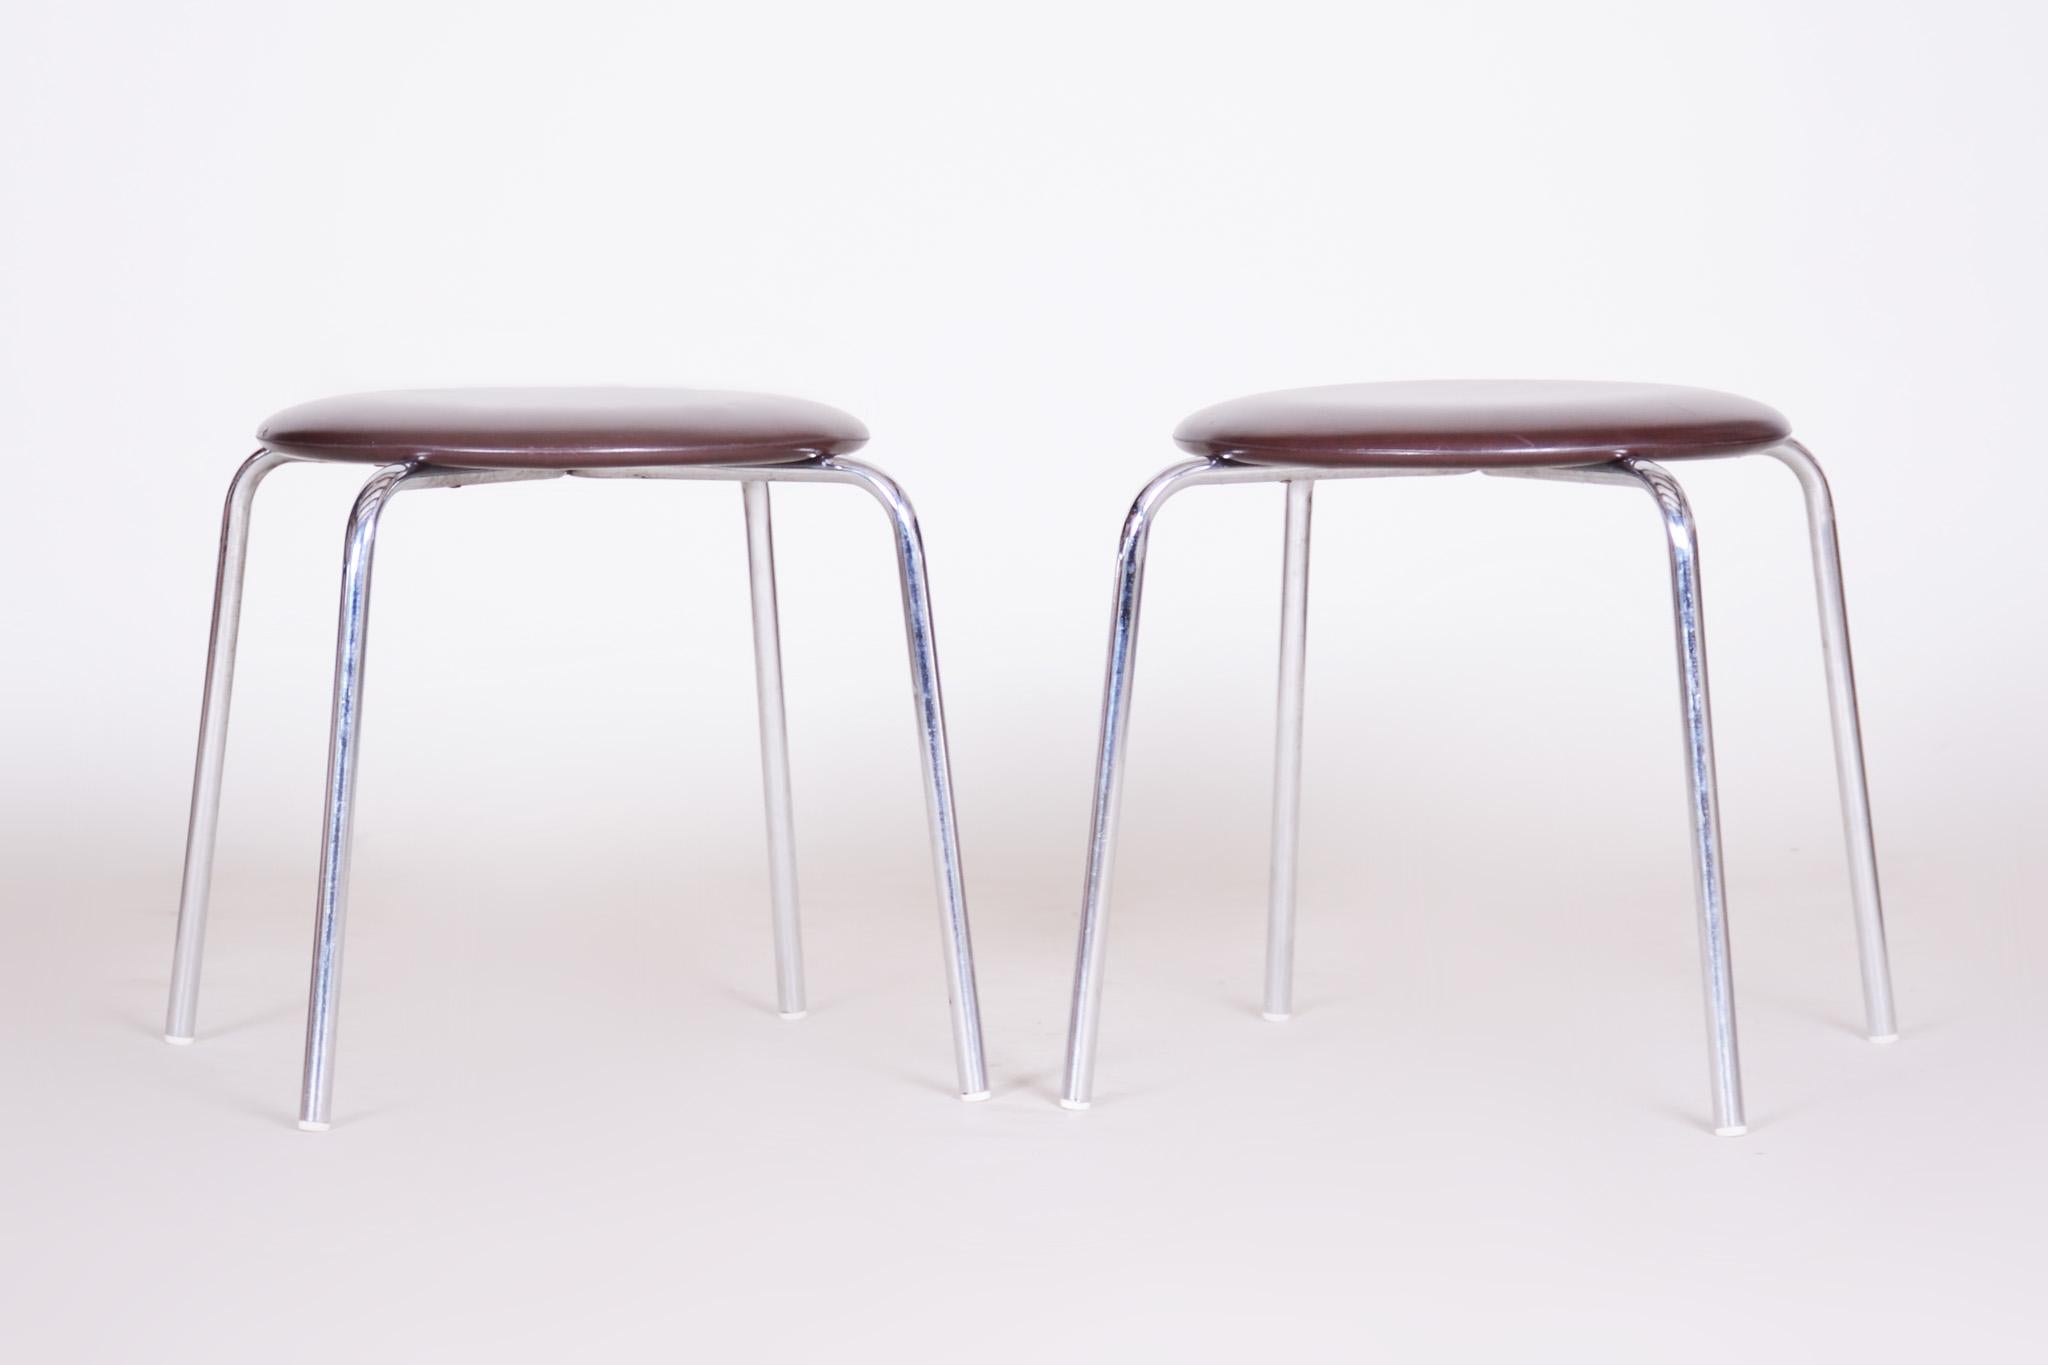 Czech Midcentury Steel and Leatherette Stools, 1960s, Original Condition For Sale